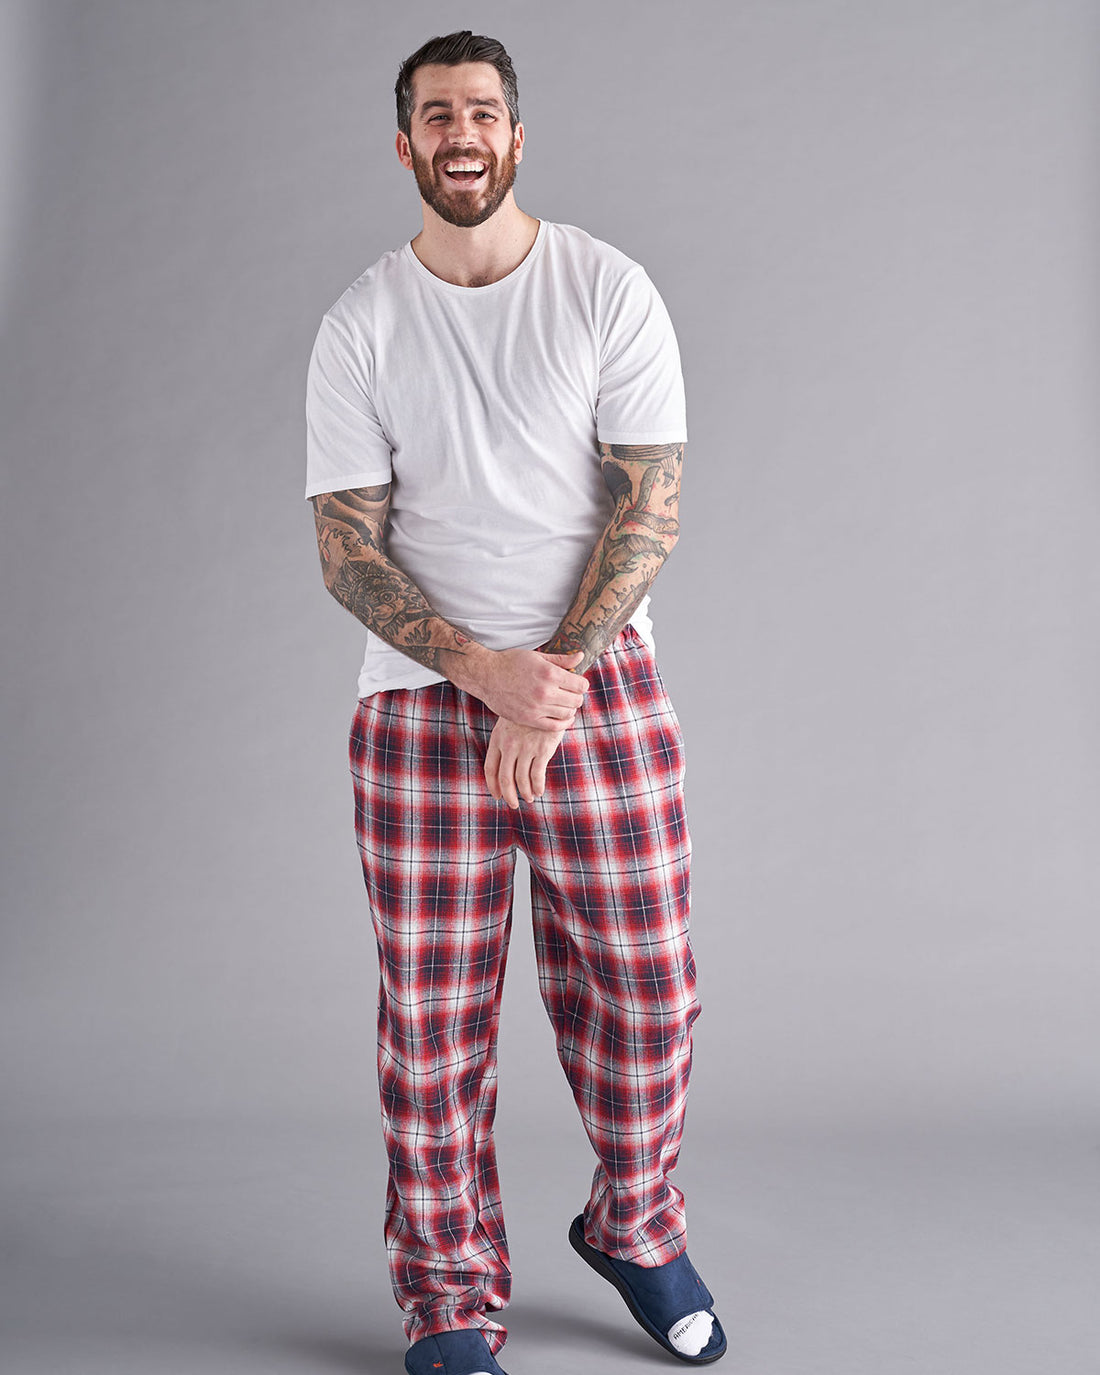 Enjoy Spring in Our Extra Tall Pajama Pants